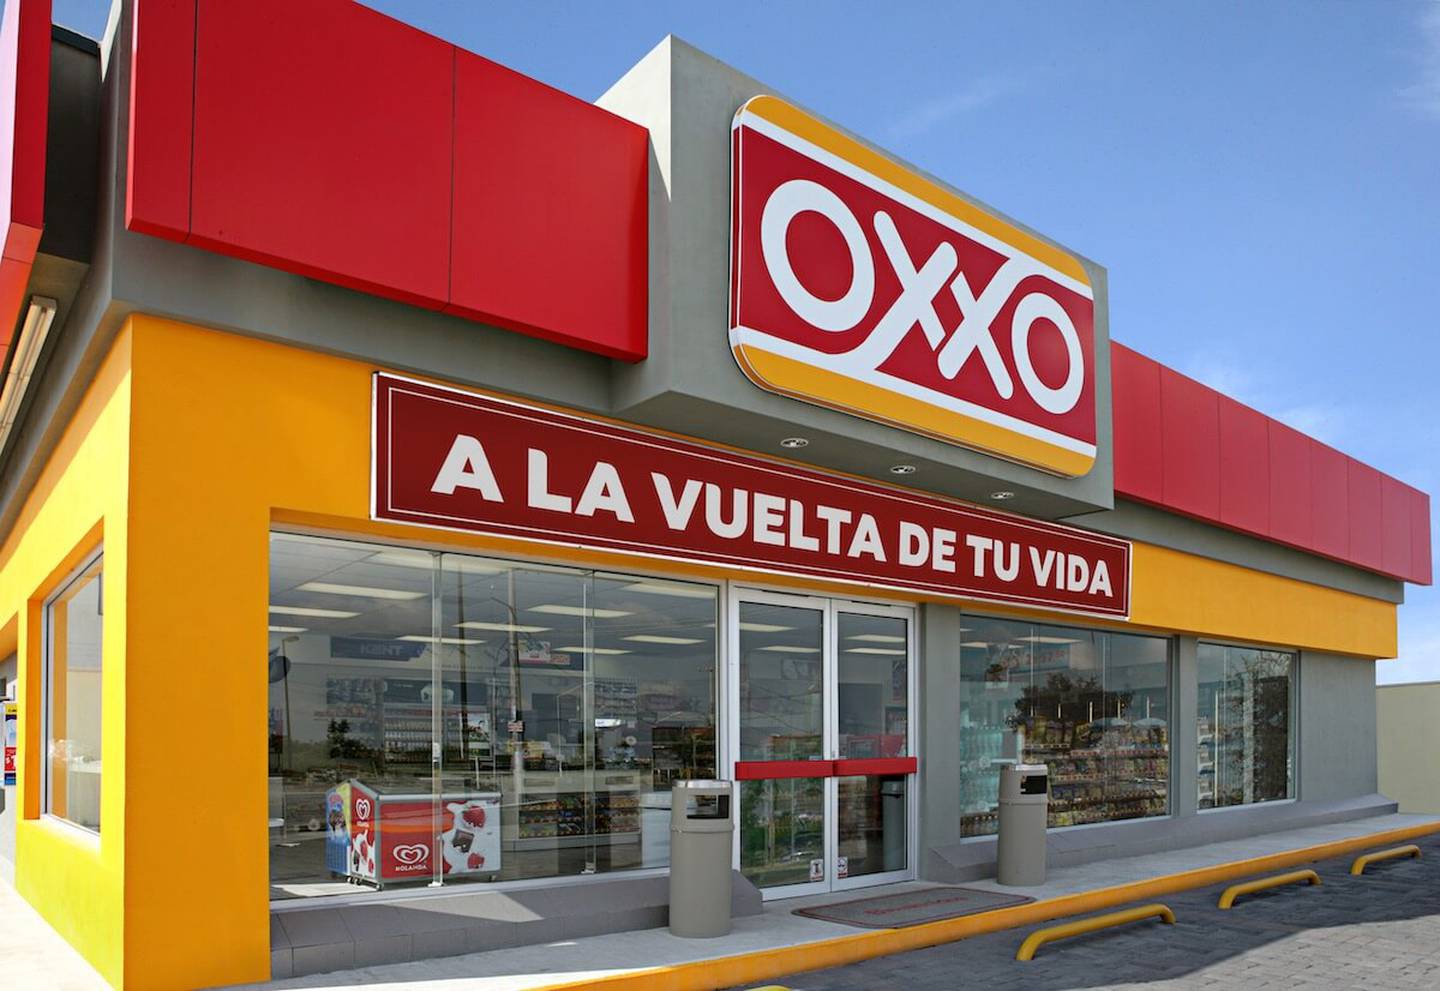 An Oxxo convenience store in Mexico.